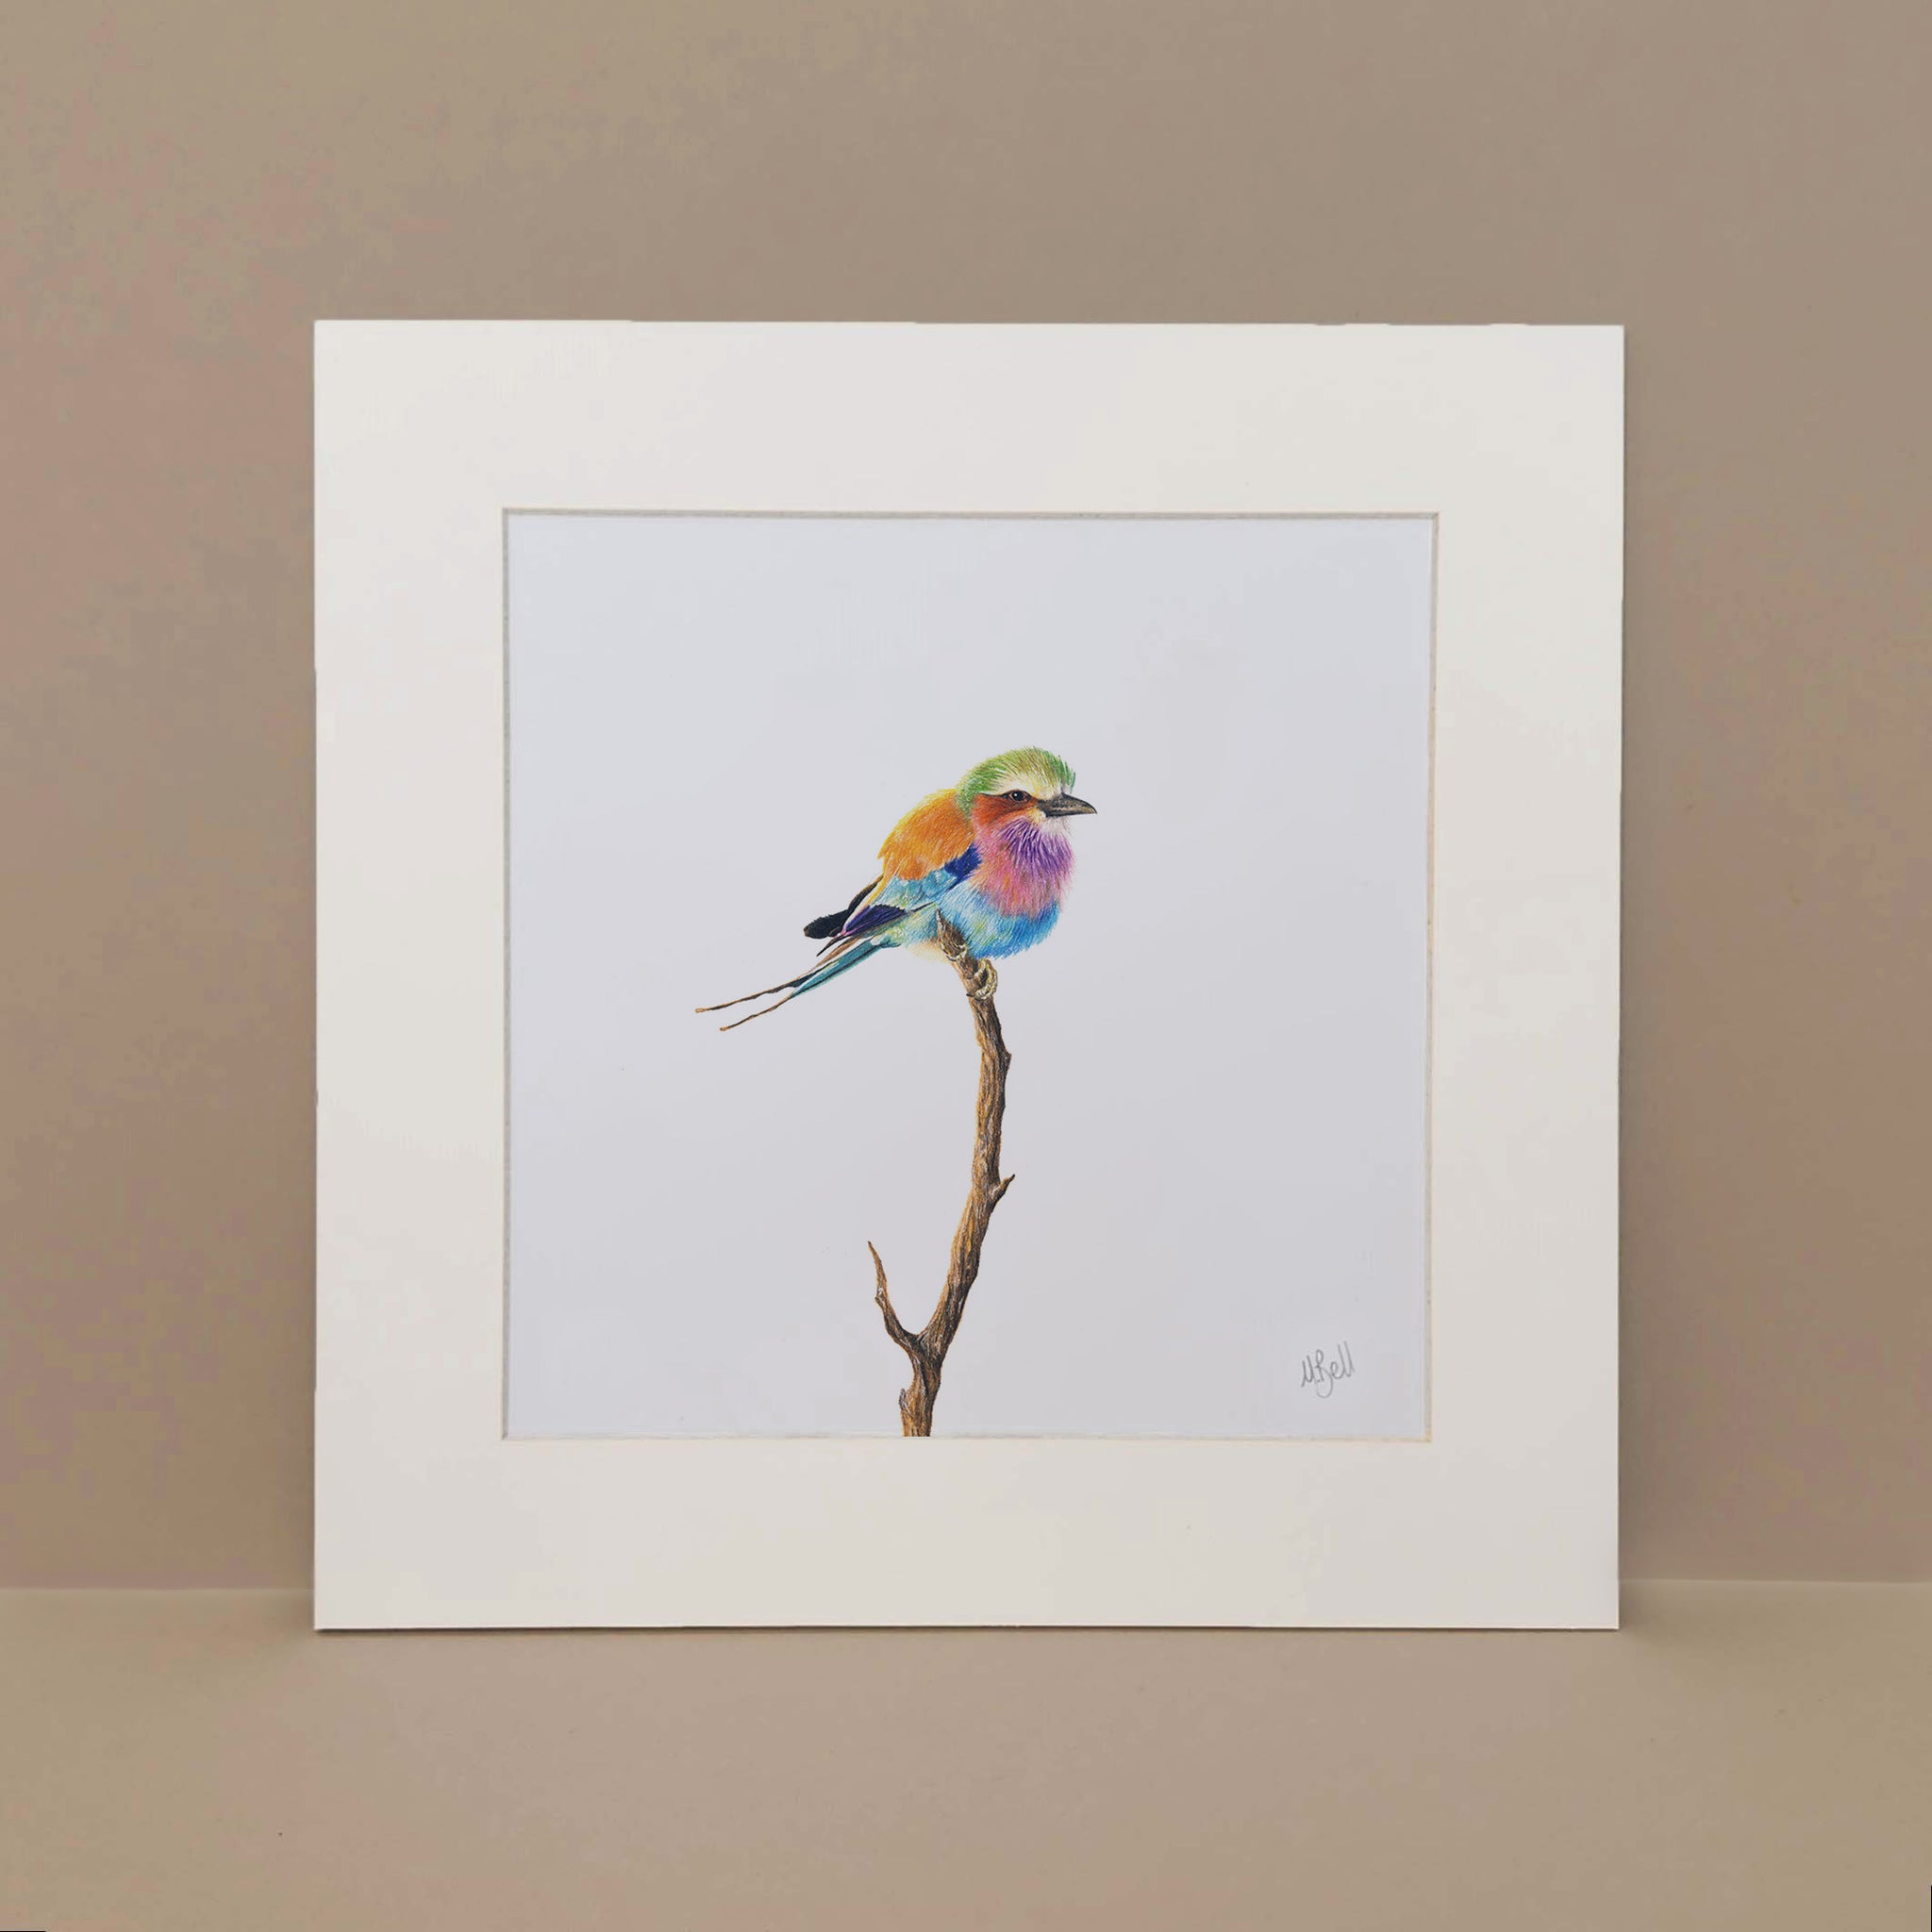 Lilac Breasted Roller art print mounted